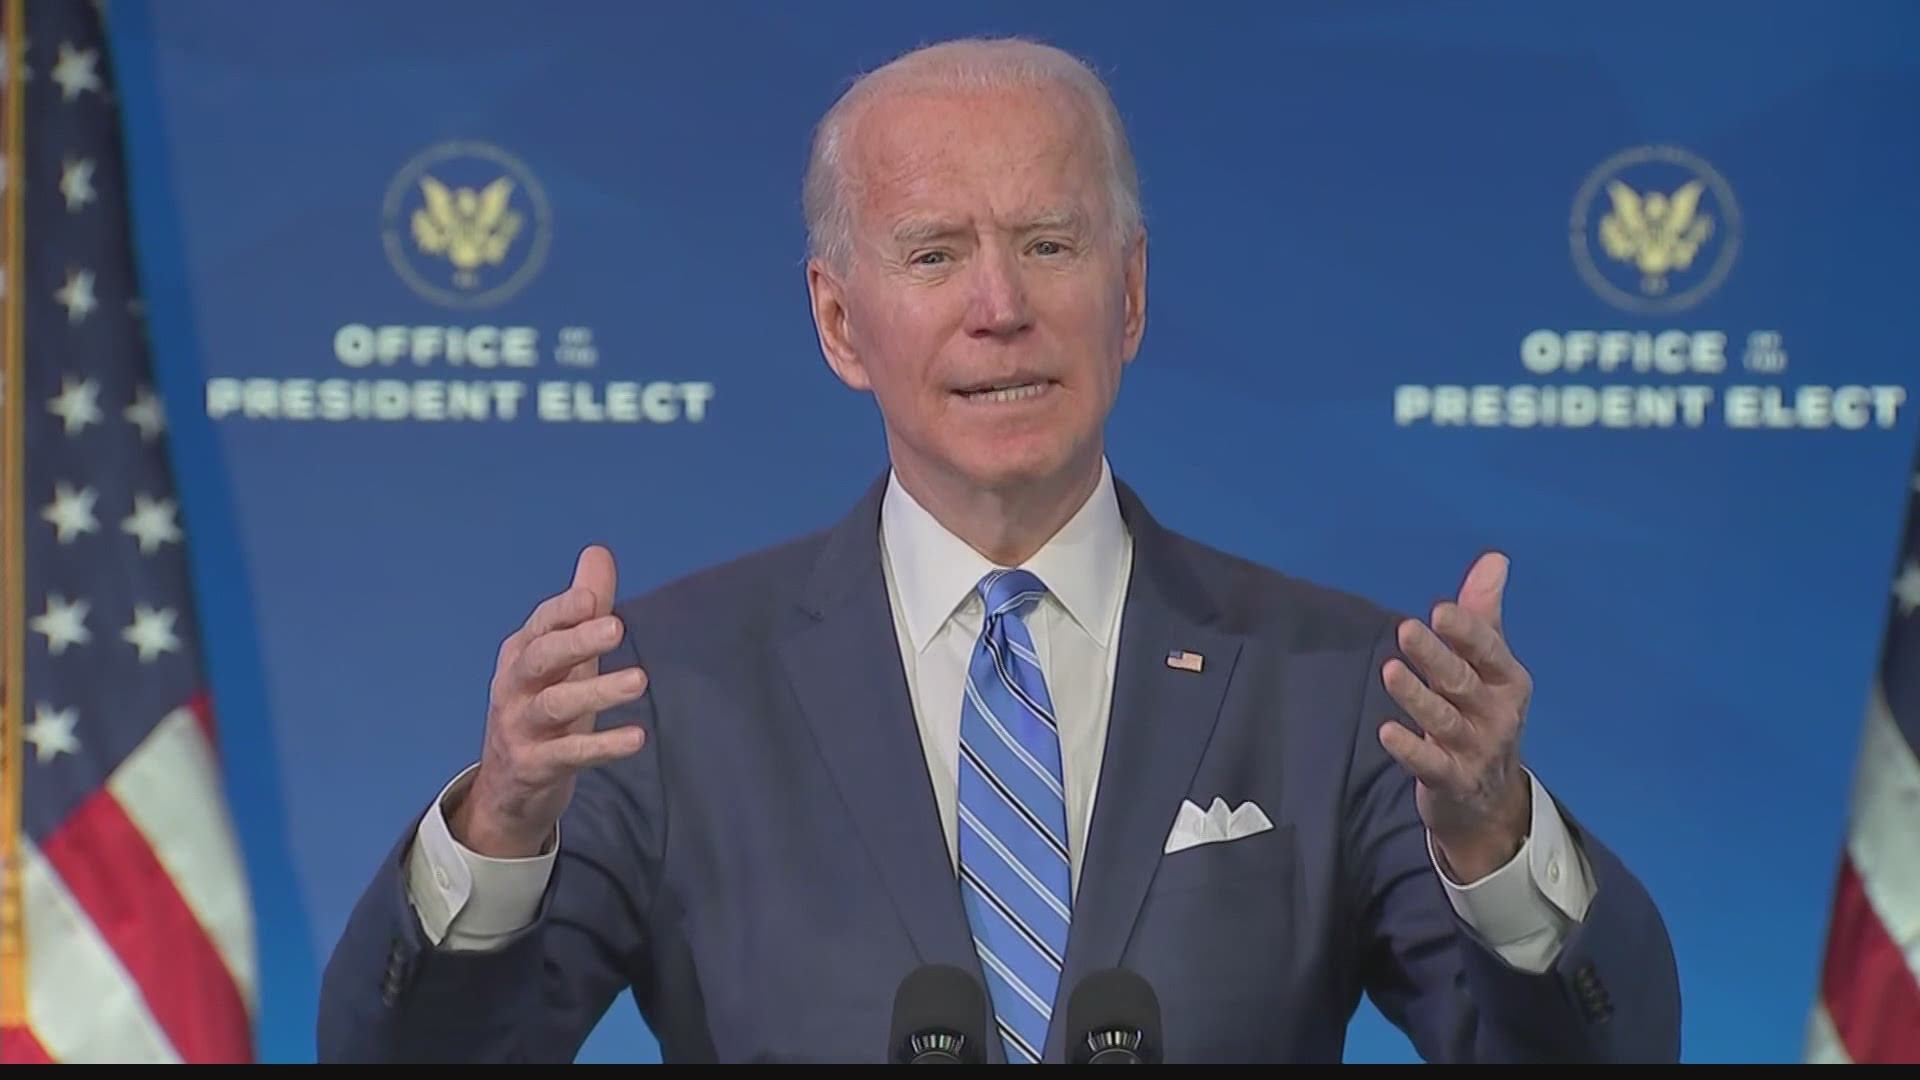 Biden also wants to increase and extend federal unemployment payments.